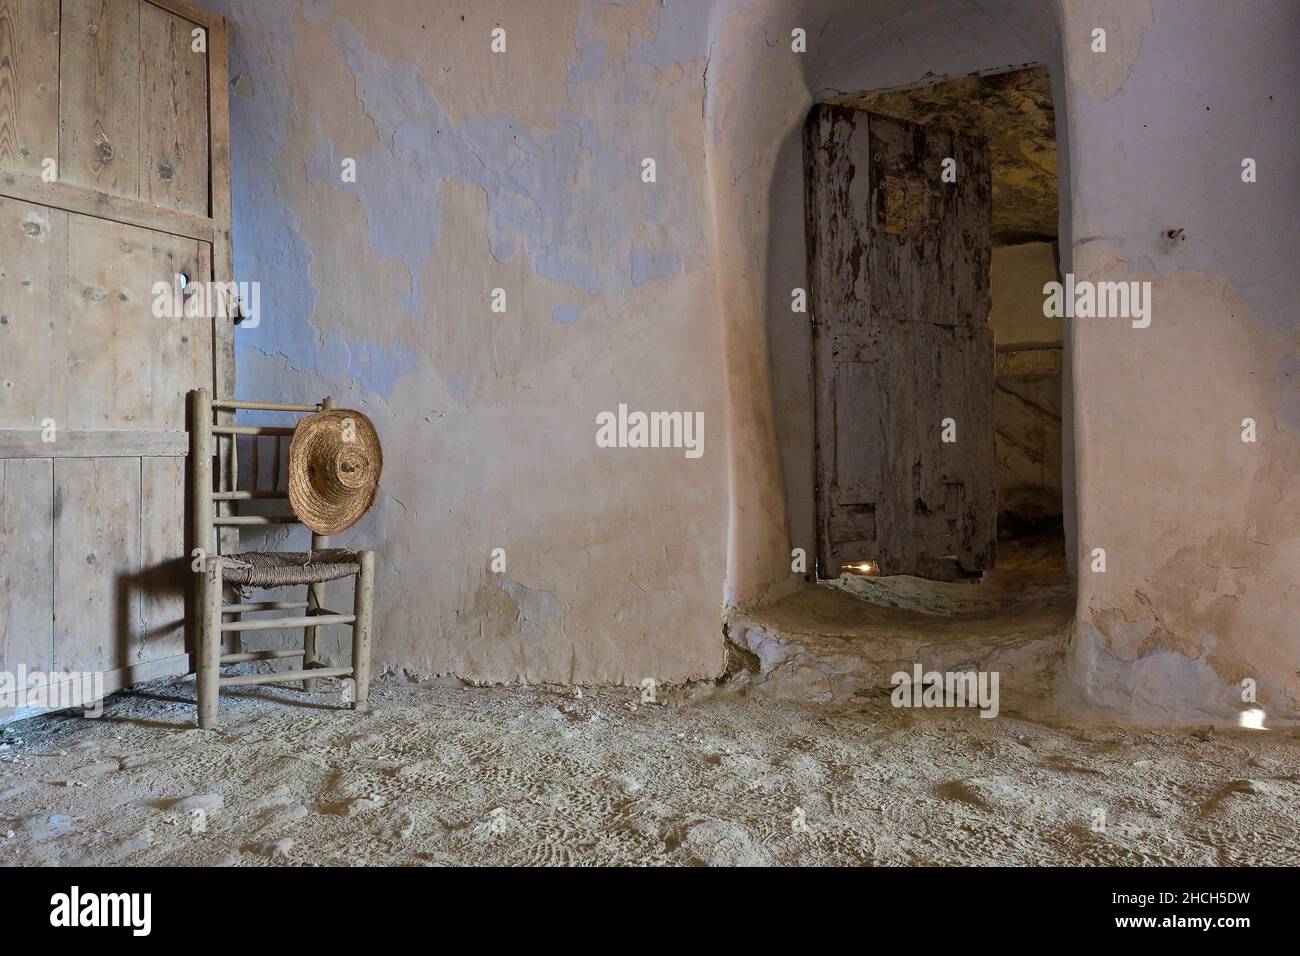 Still life with wooden chair and straw hat, room of a cave house, Andalusia, Spain Stock Photo